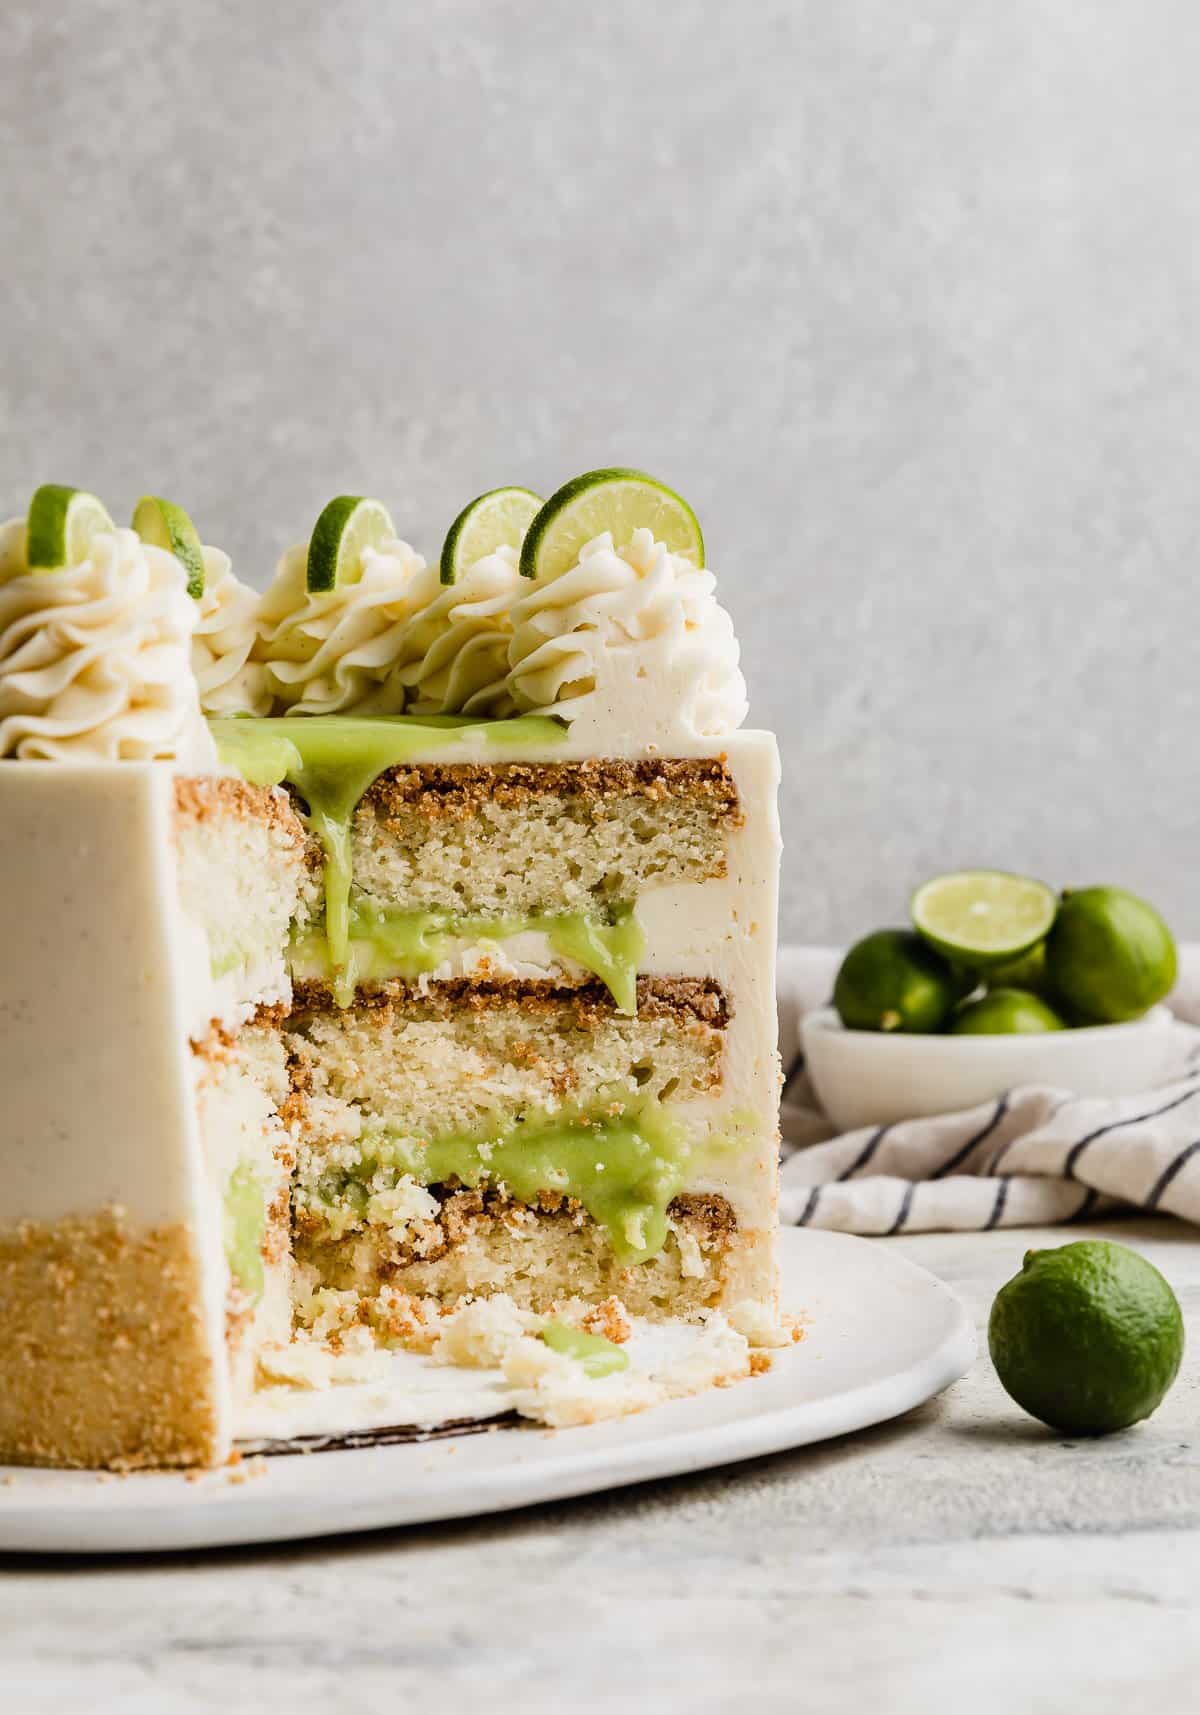 A Key Lime Cake Recipe cut, exposing the three slices of lime cake baked on graham cracker crusts and filled with a light green key lime curd and white frosting.